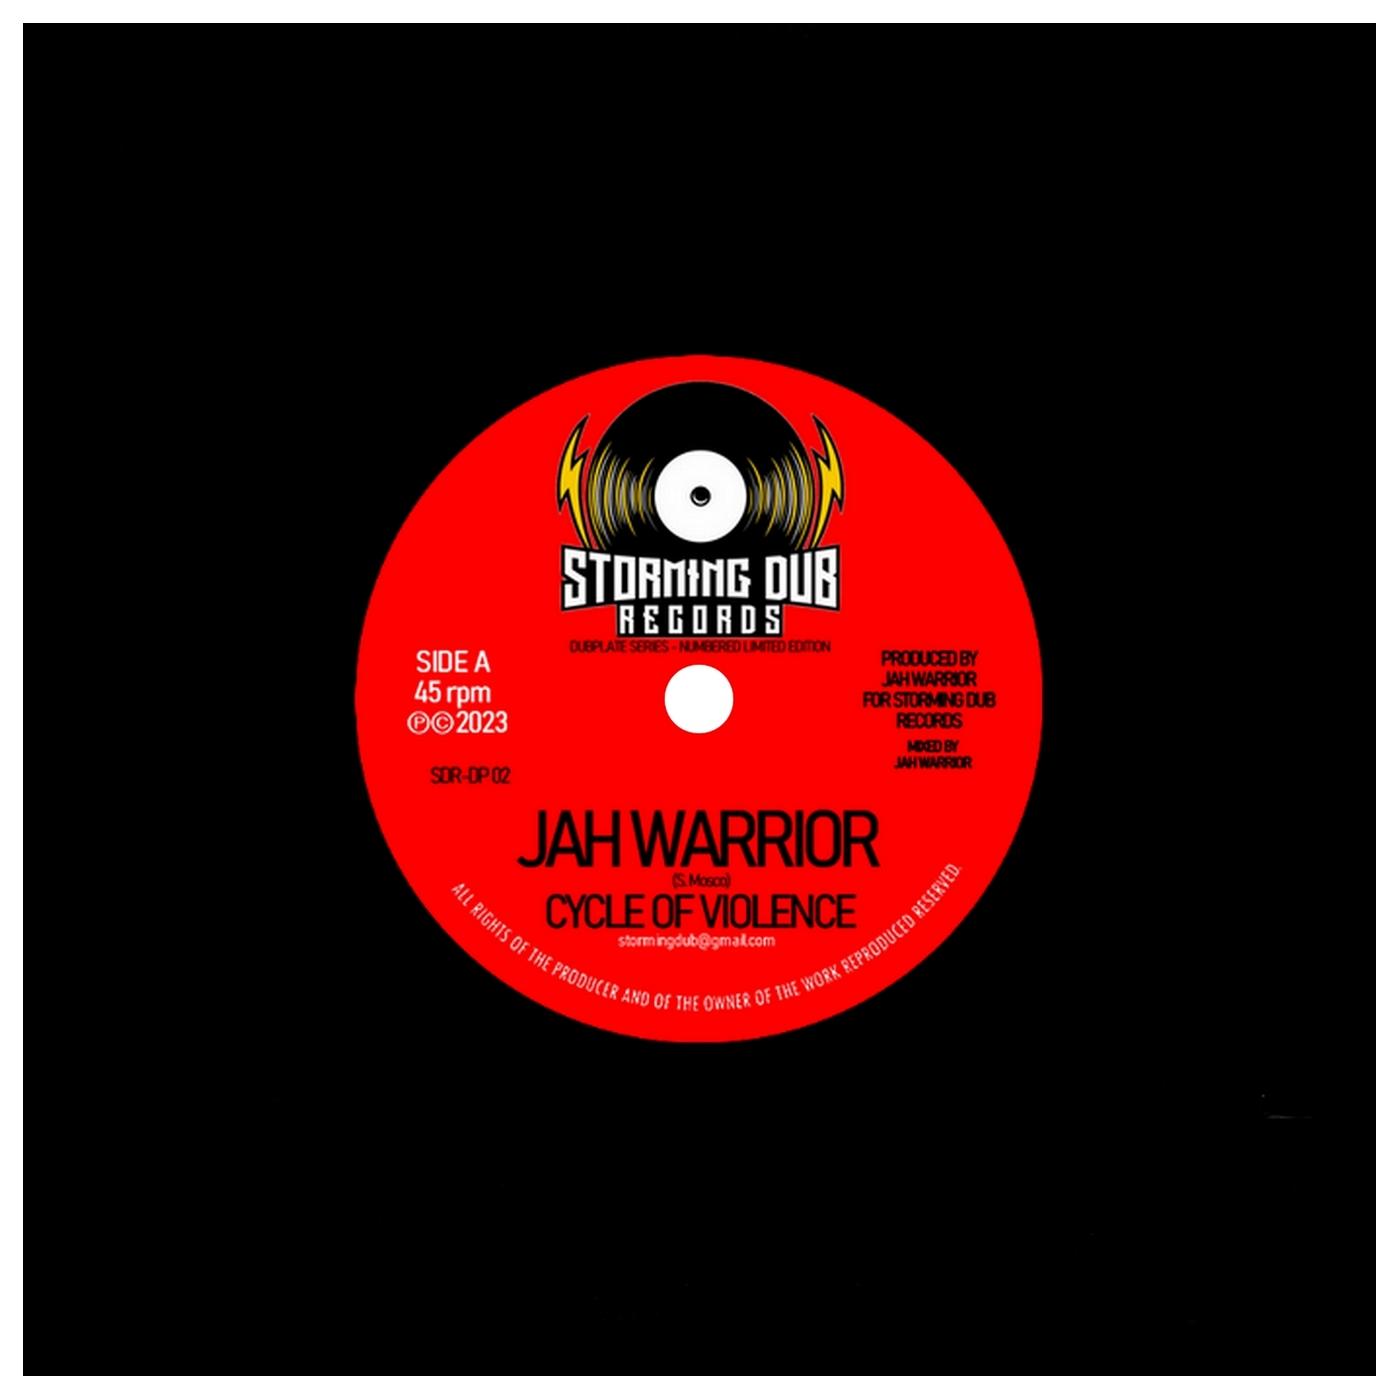 CYCLE OF VIOLENCE Jah Warrior STORMING DUB 7 inch (LATHE CUT LIMITED EDITION)